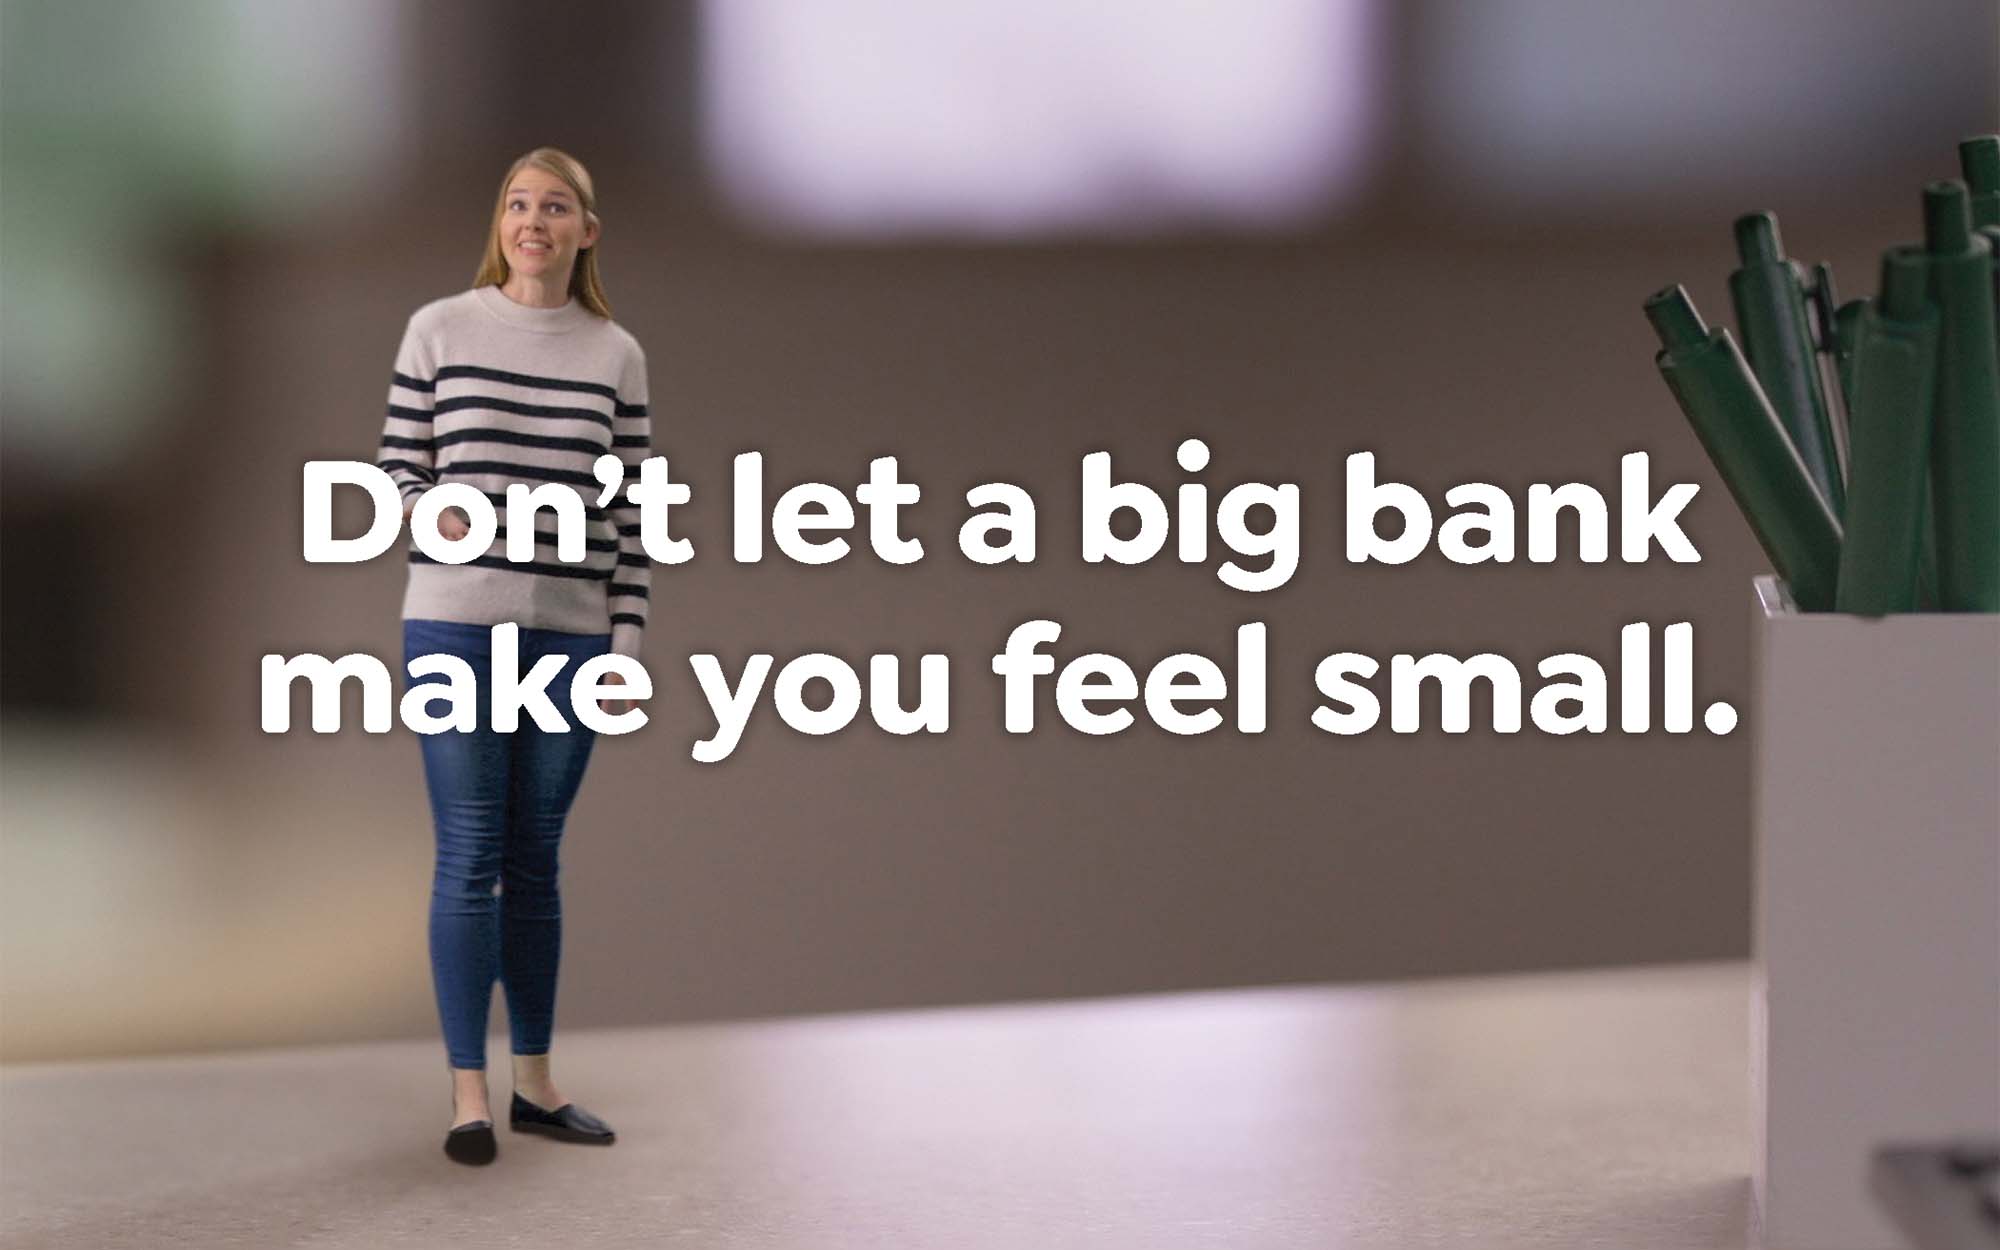 Image of a woman with text overlay: "Don't let a big bank make you feel small."